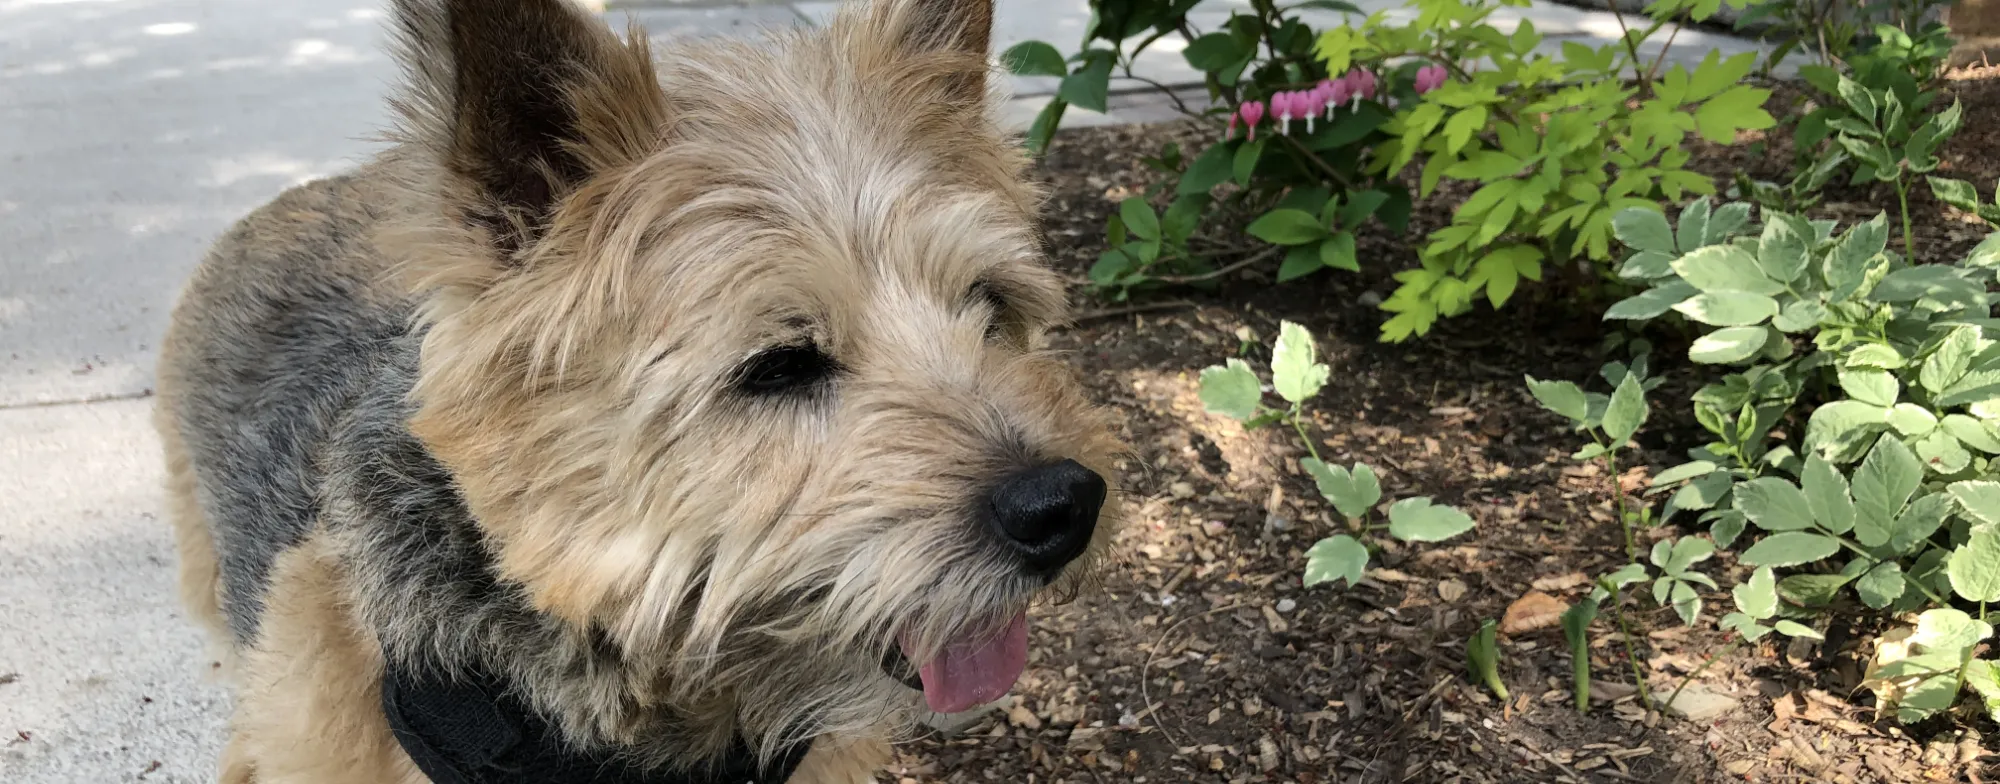 Image contains a photo of a small terrier with their tongue out next to some plants.